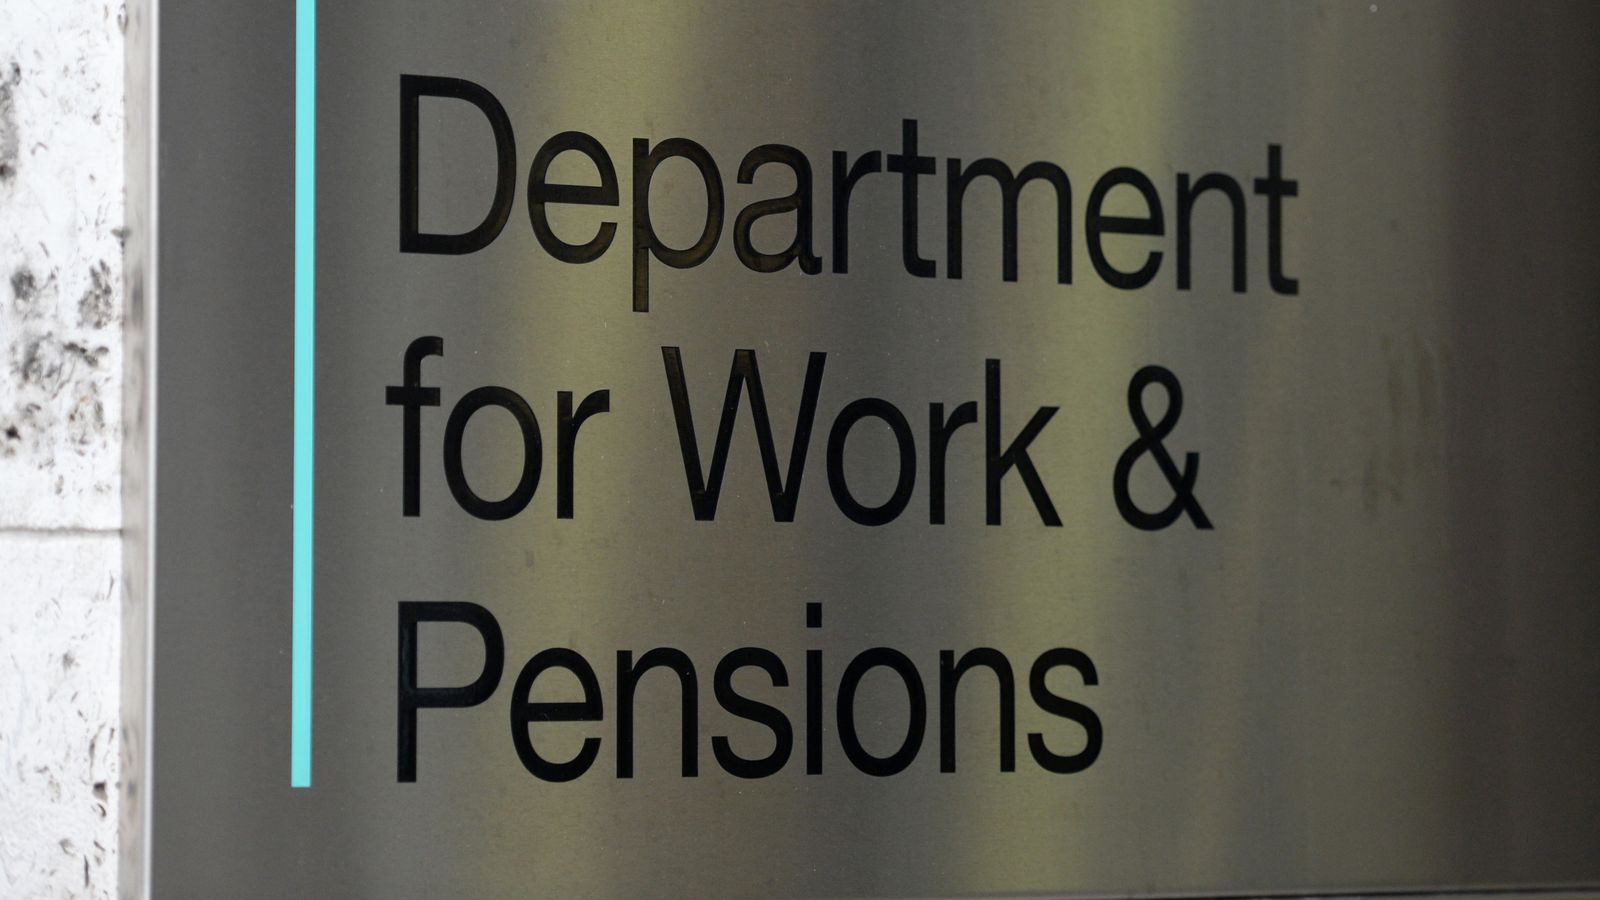 Benefits health assessment system 'contributed to death of claimants' - report finds